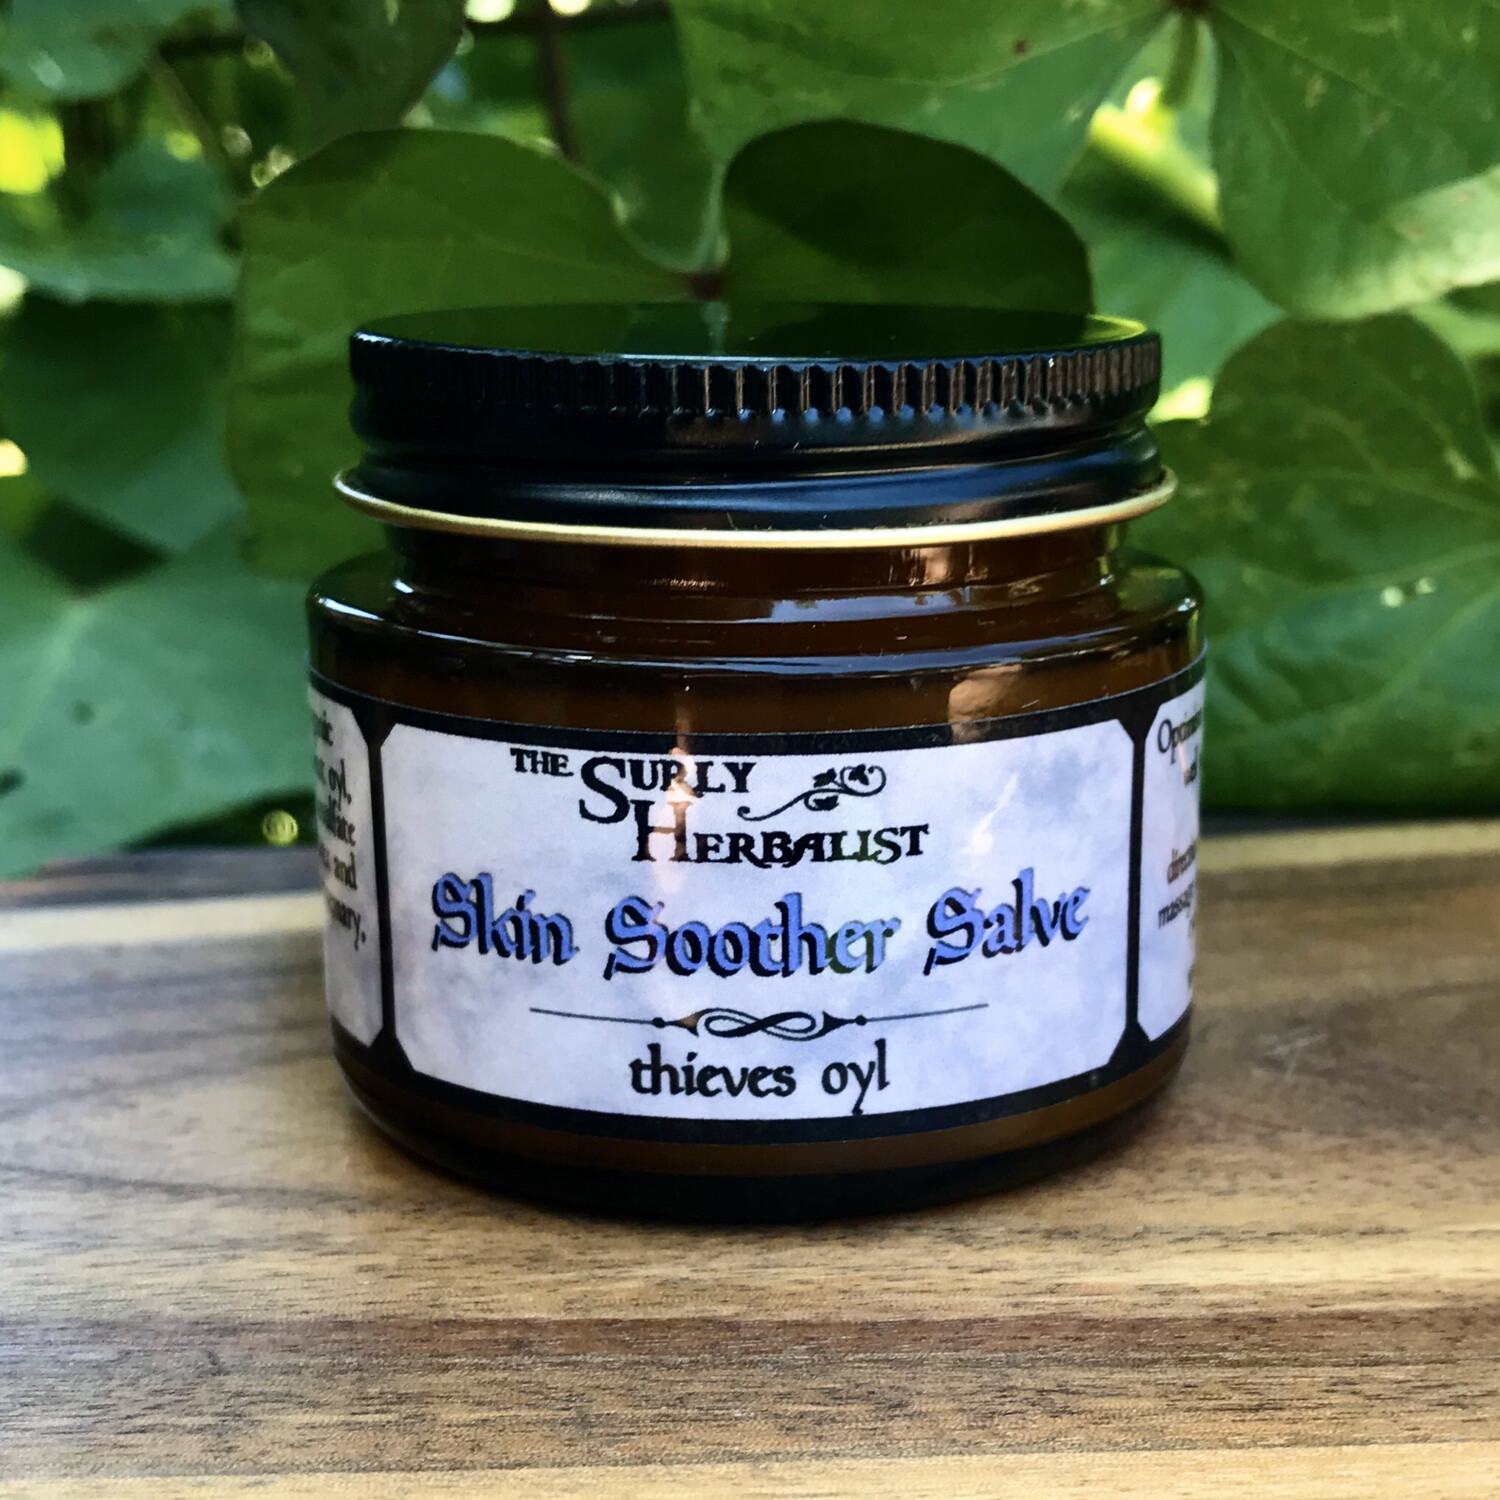 Skin Soother Salve - Thieves Oyl